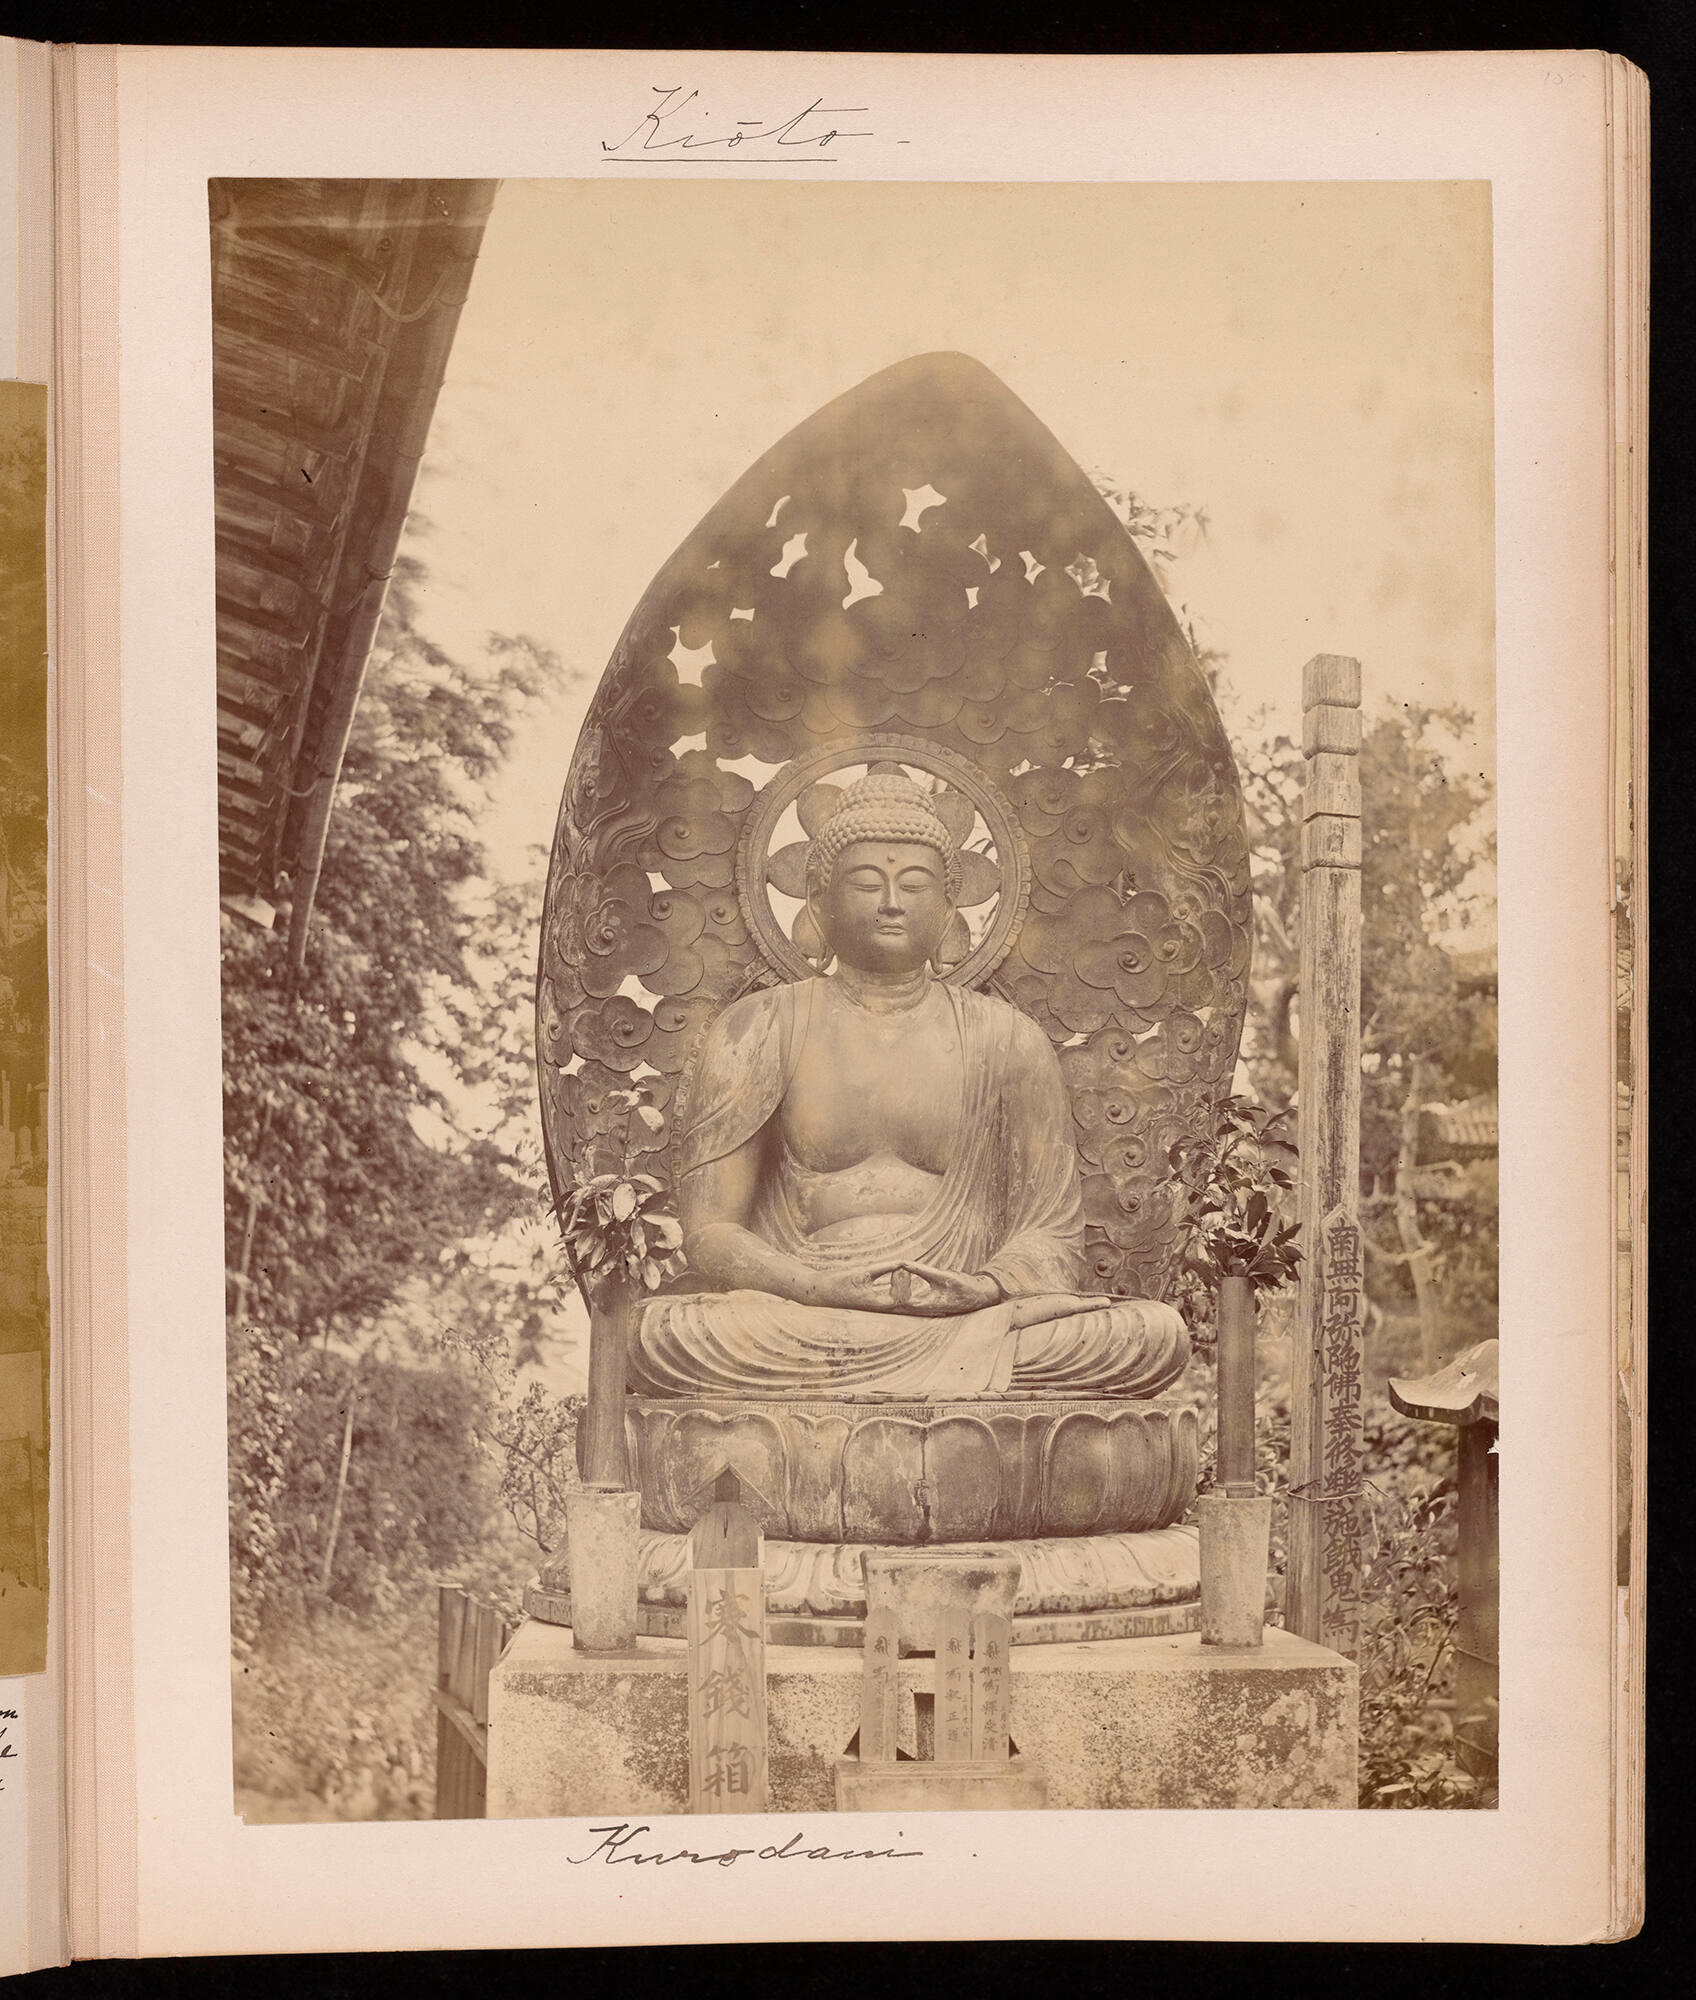 A page from Isabella Stewart Gardner’s travel album with a black and white photograph of a seated Buddha with a large shell behind.